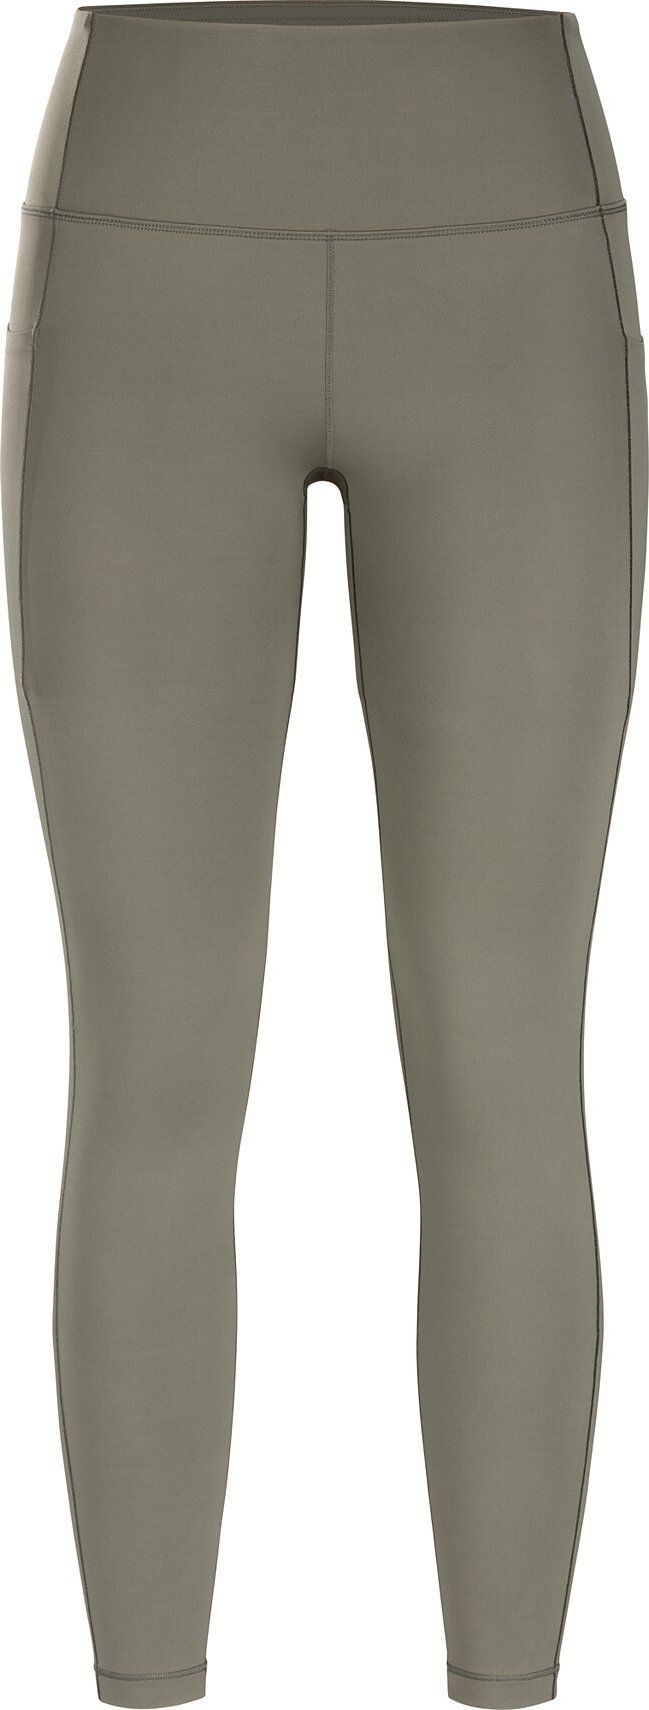 Patagonia W'S Maipo 7/8 Stash Tights Nouveau Green, Buy Patagonia W'S Maipo  7/8 Stash Tights Nouveau Green here